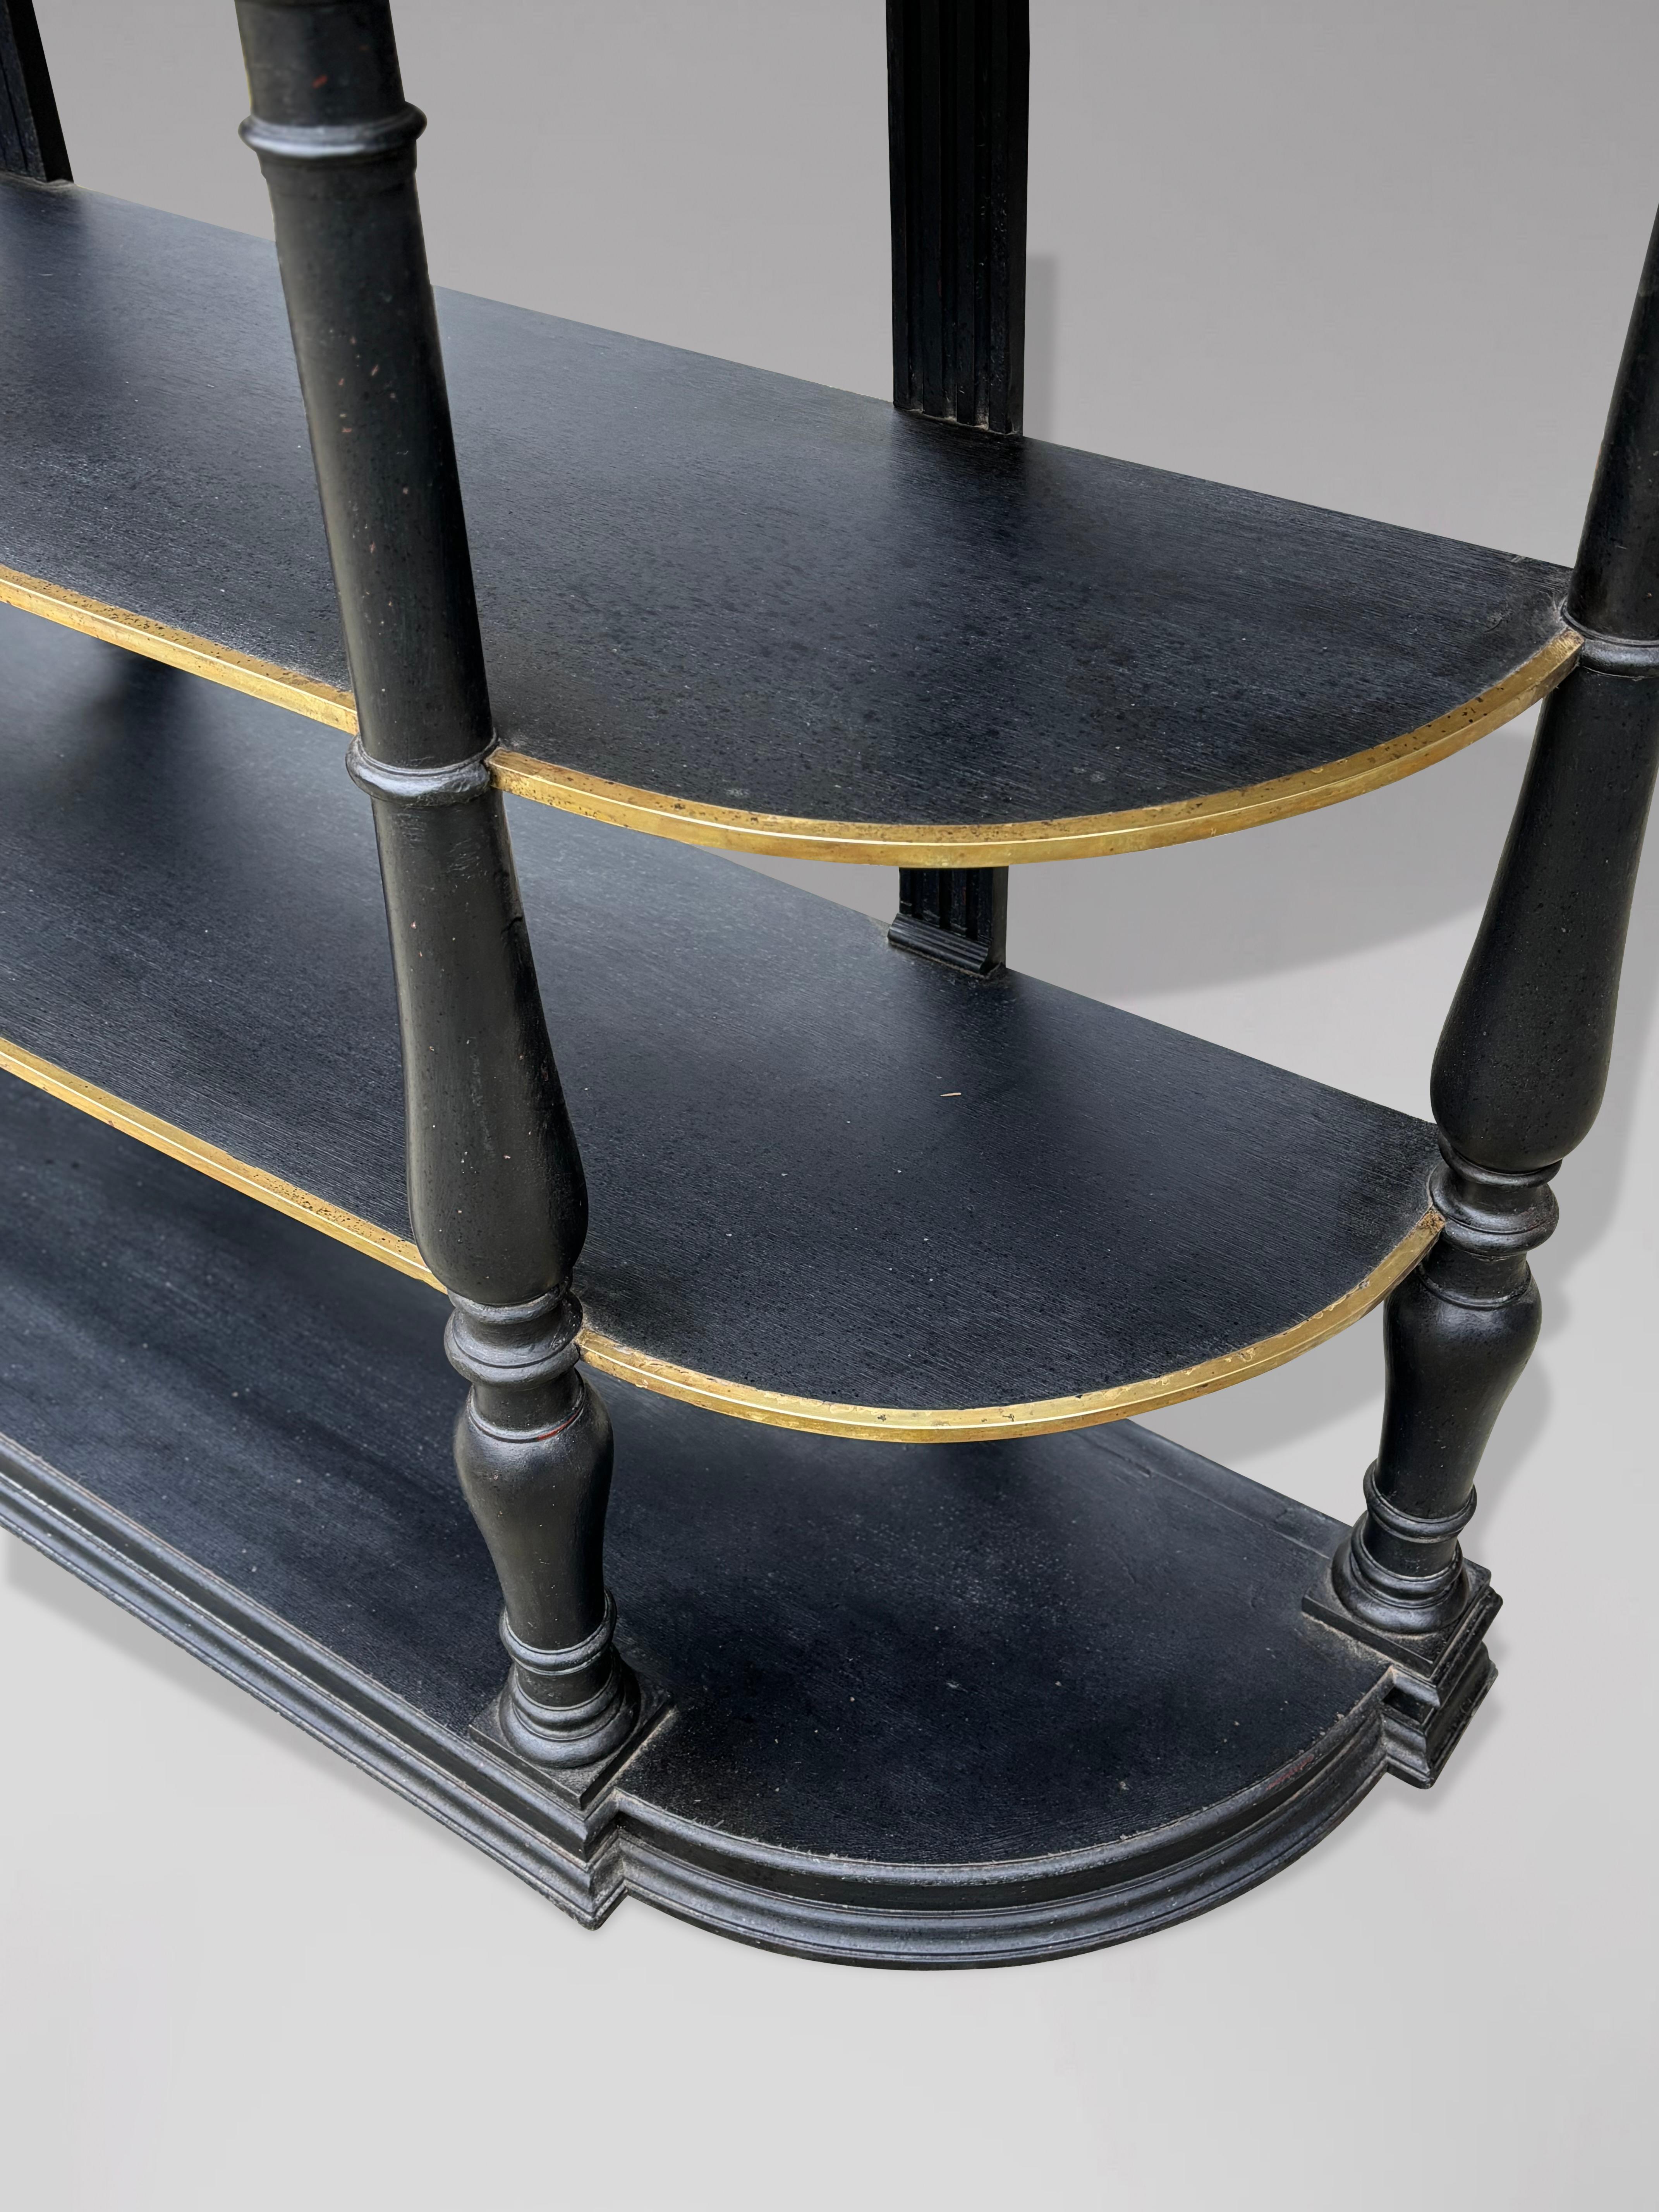 19th Century Large French Painted Black Marble Top Console Table In Good Condition For Sale In Petworth,West Sussex, GB